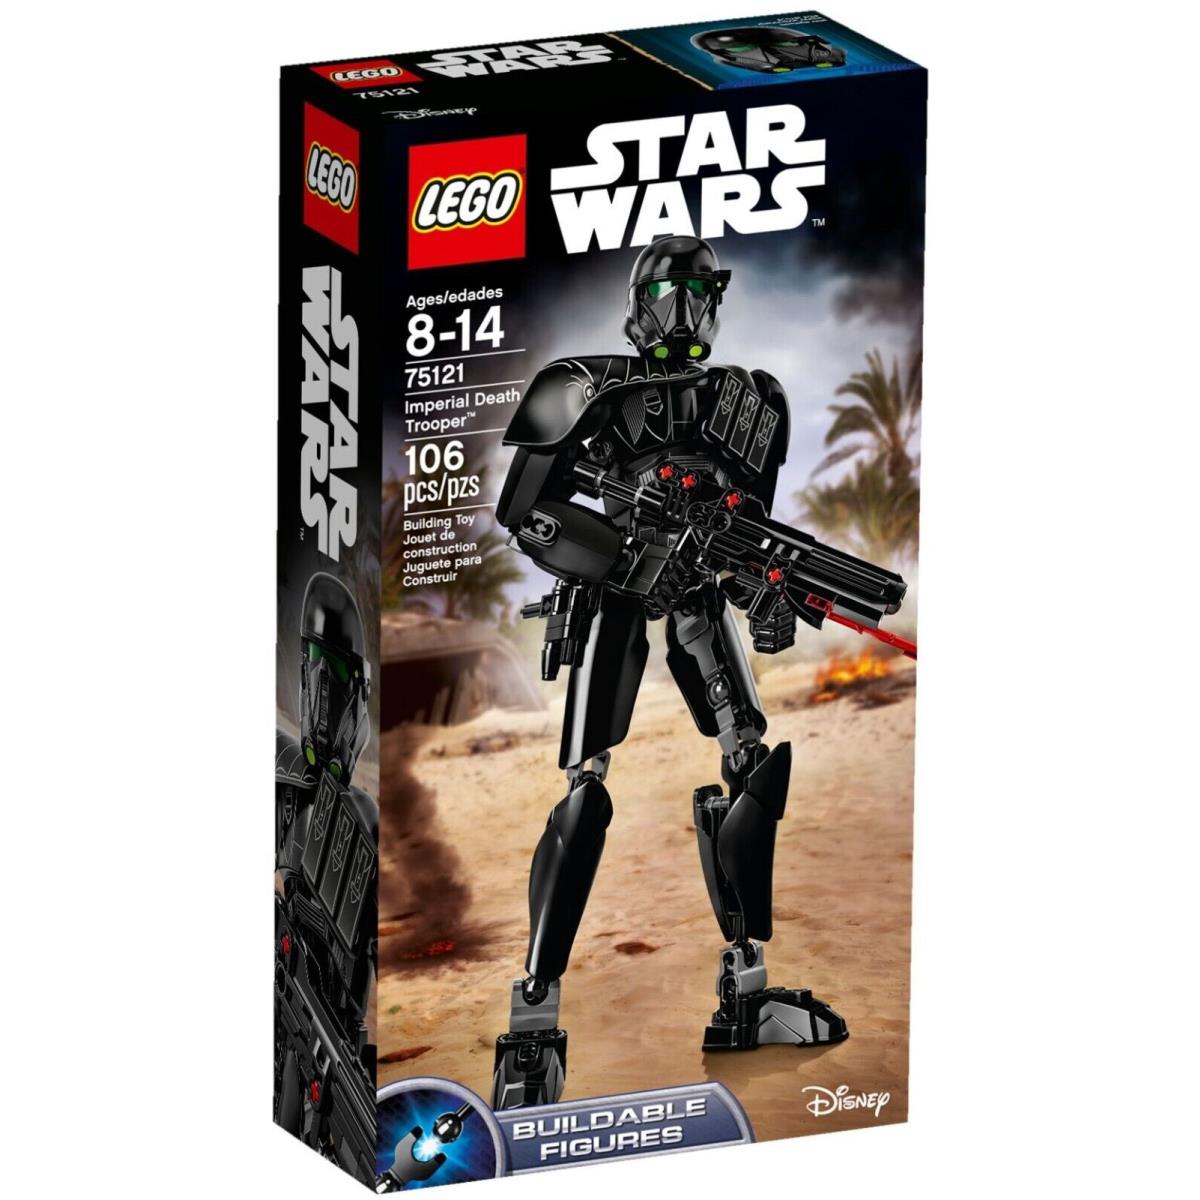 Lego Star Wars Buildable Figures 75121 - Imperial Death Trooper